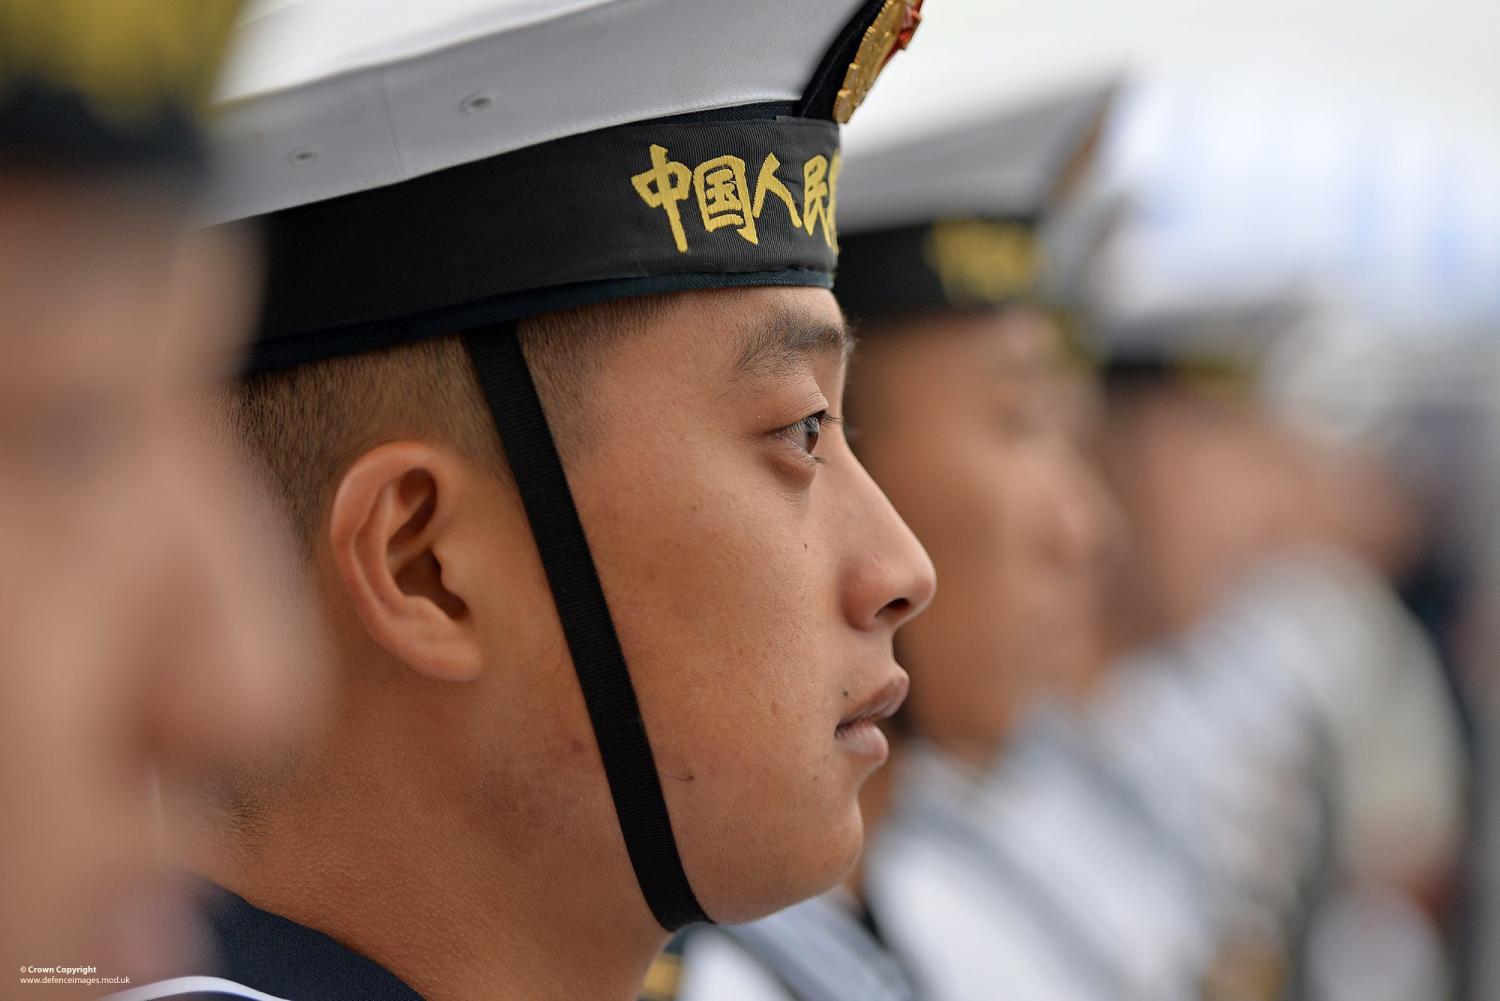 Chinese sailors of the PLA Navy Ship Changbai Shan line the deck as the ship enters Portsmouth for a port visit, January 2015. (Getty/Defence Imagery)